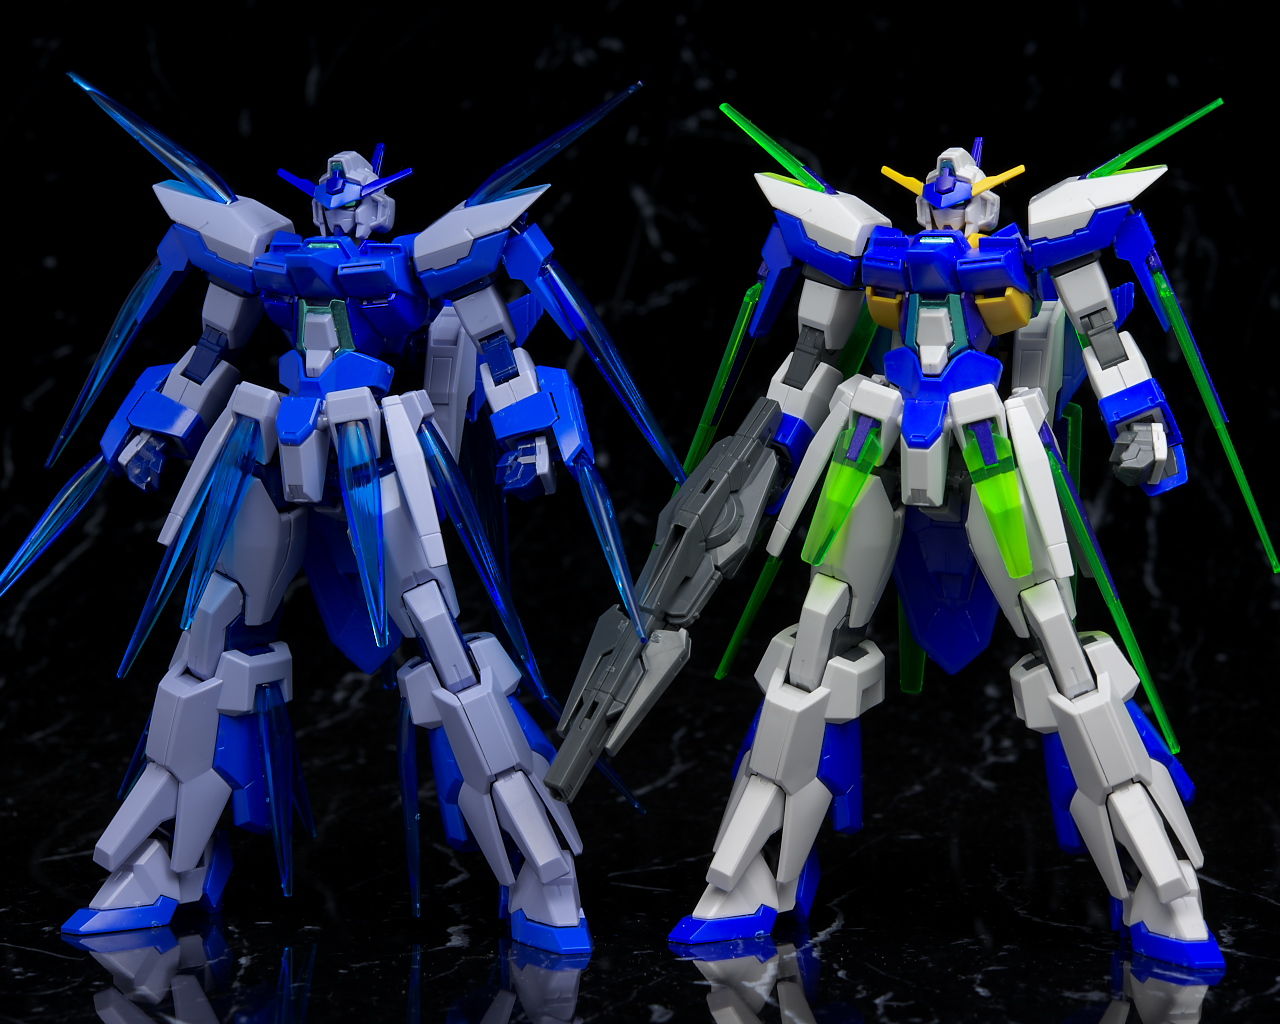 HG 1/144 Gundam AGE-FX Burst: Kit Photo Review No.24 Wallpaper Size Images & Links to ...1280 x 1024